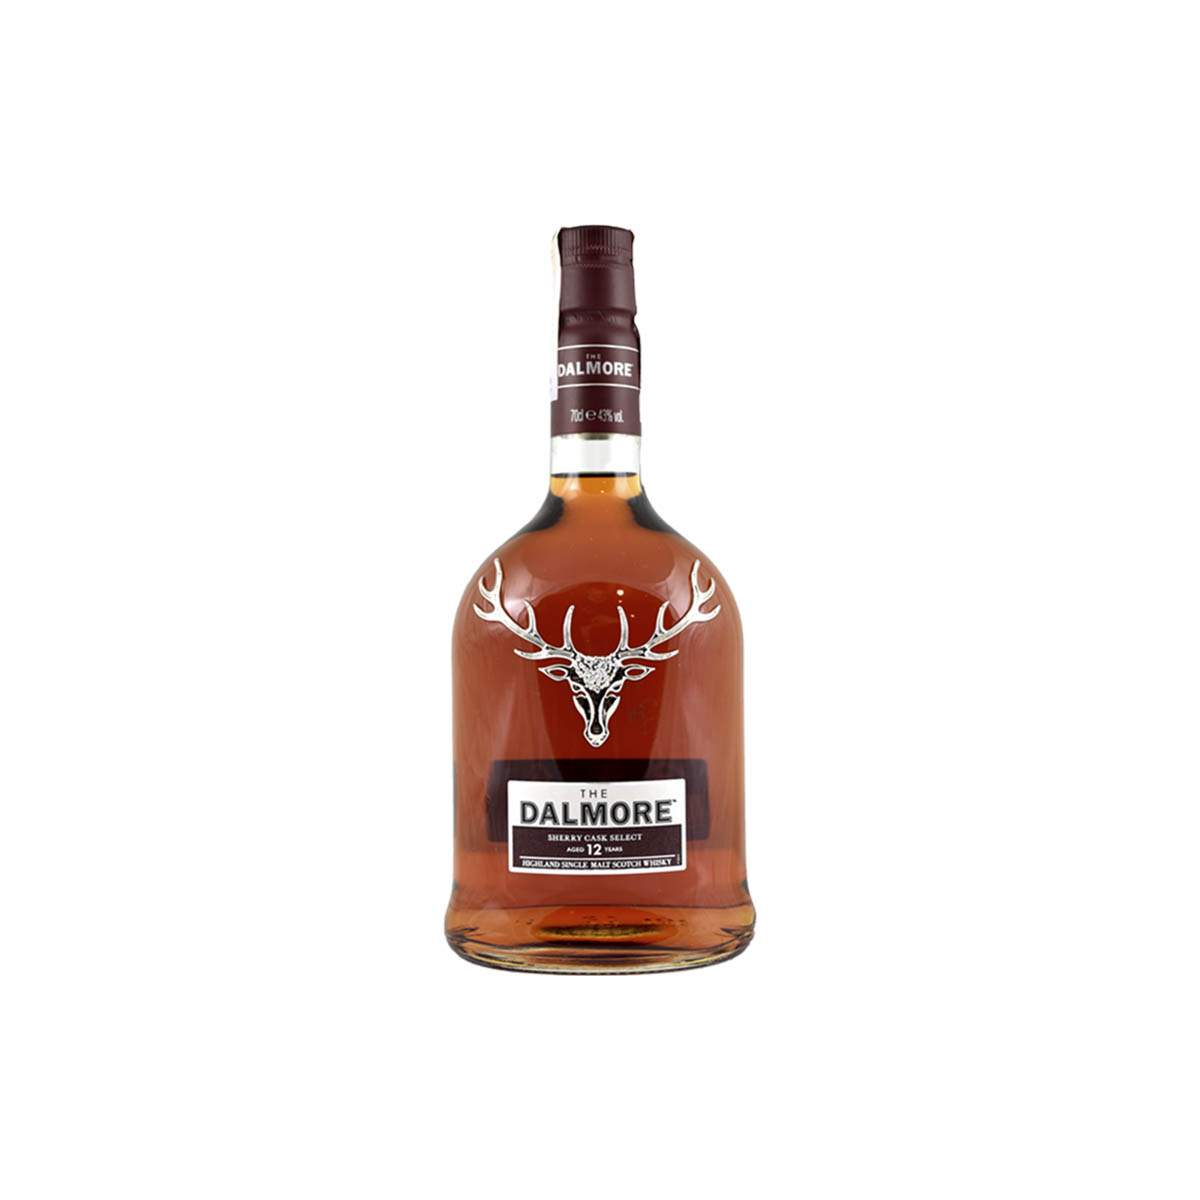 The Dalmore Sherry Cask Select 12 (43%) - 30 ml.